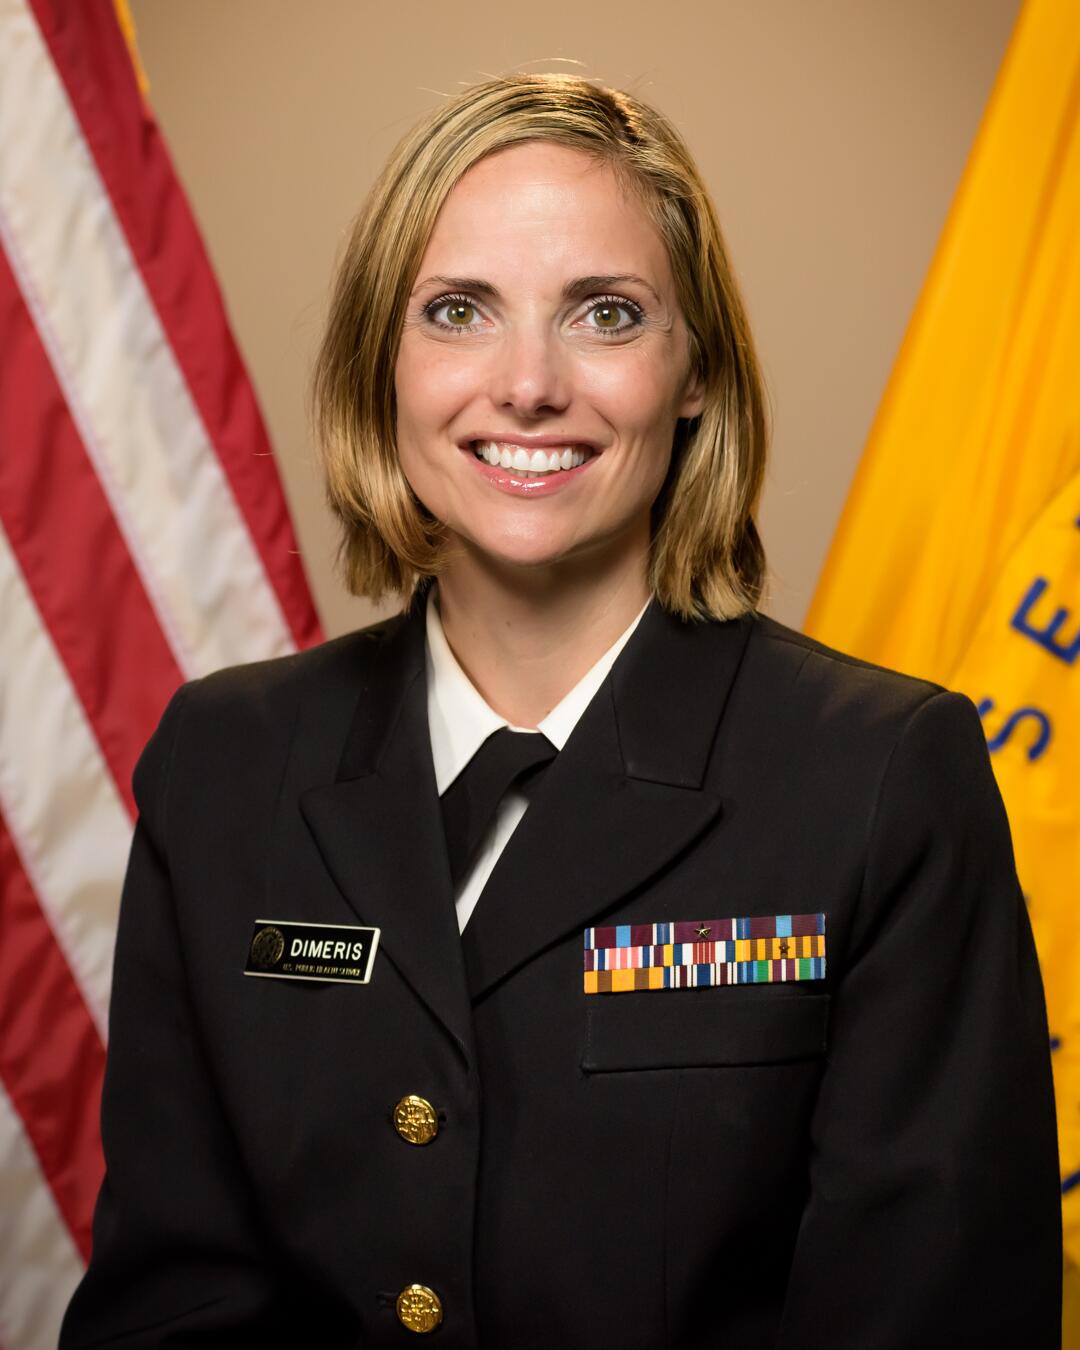 CDR Heather Dimeris, Director, Office for the Advancement of Telehealth